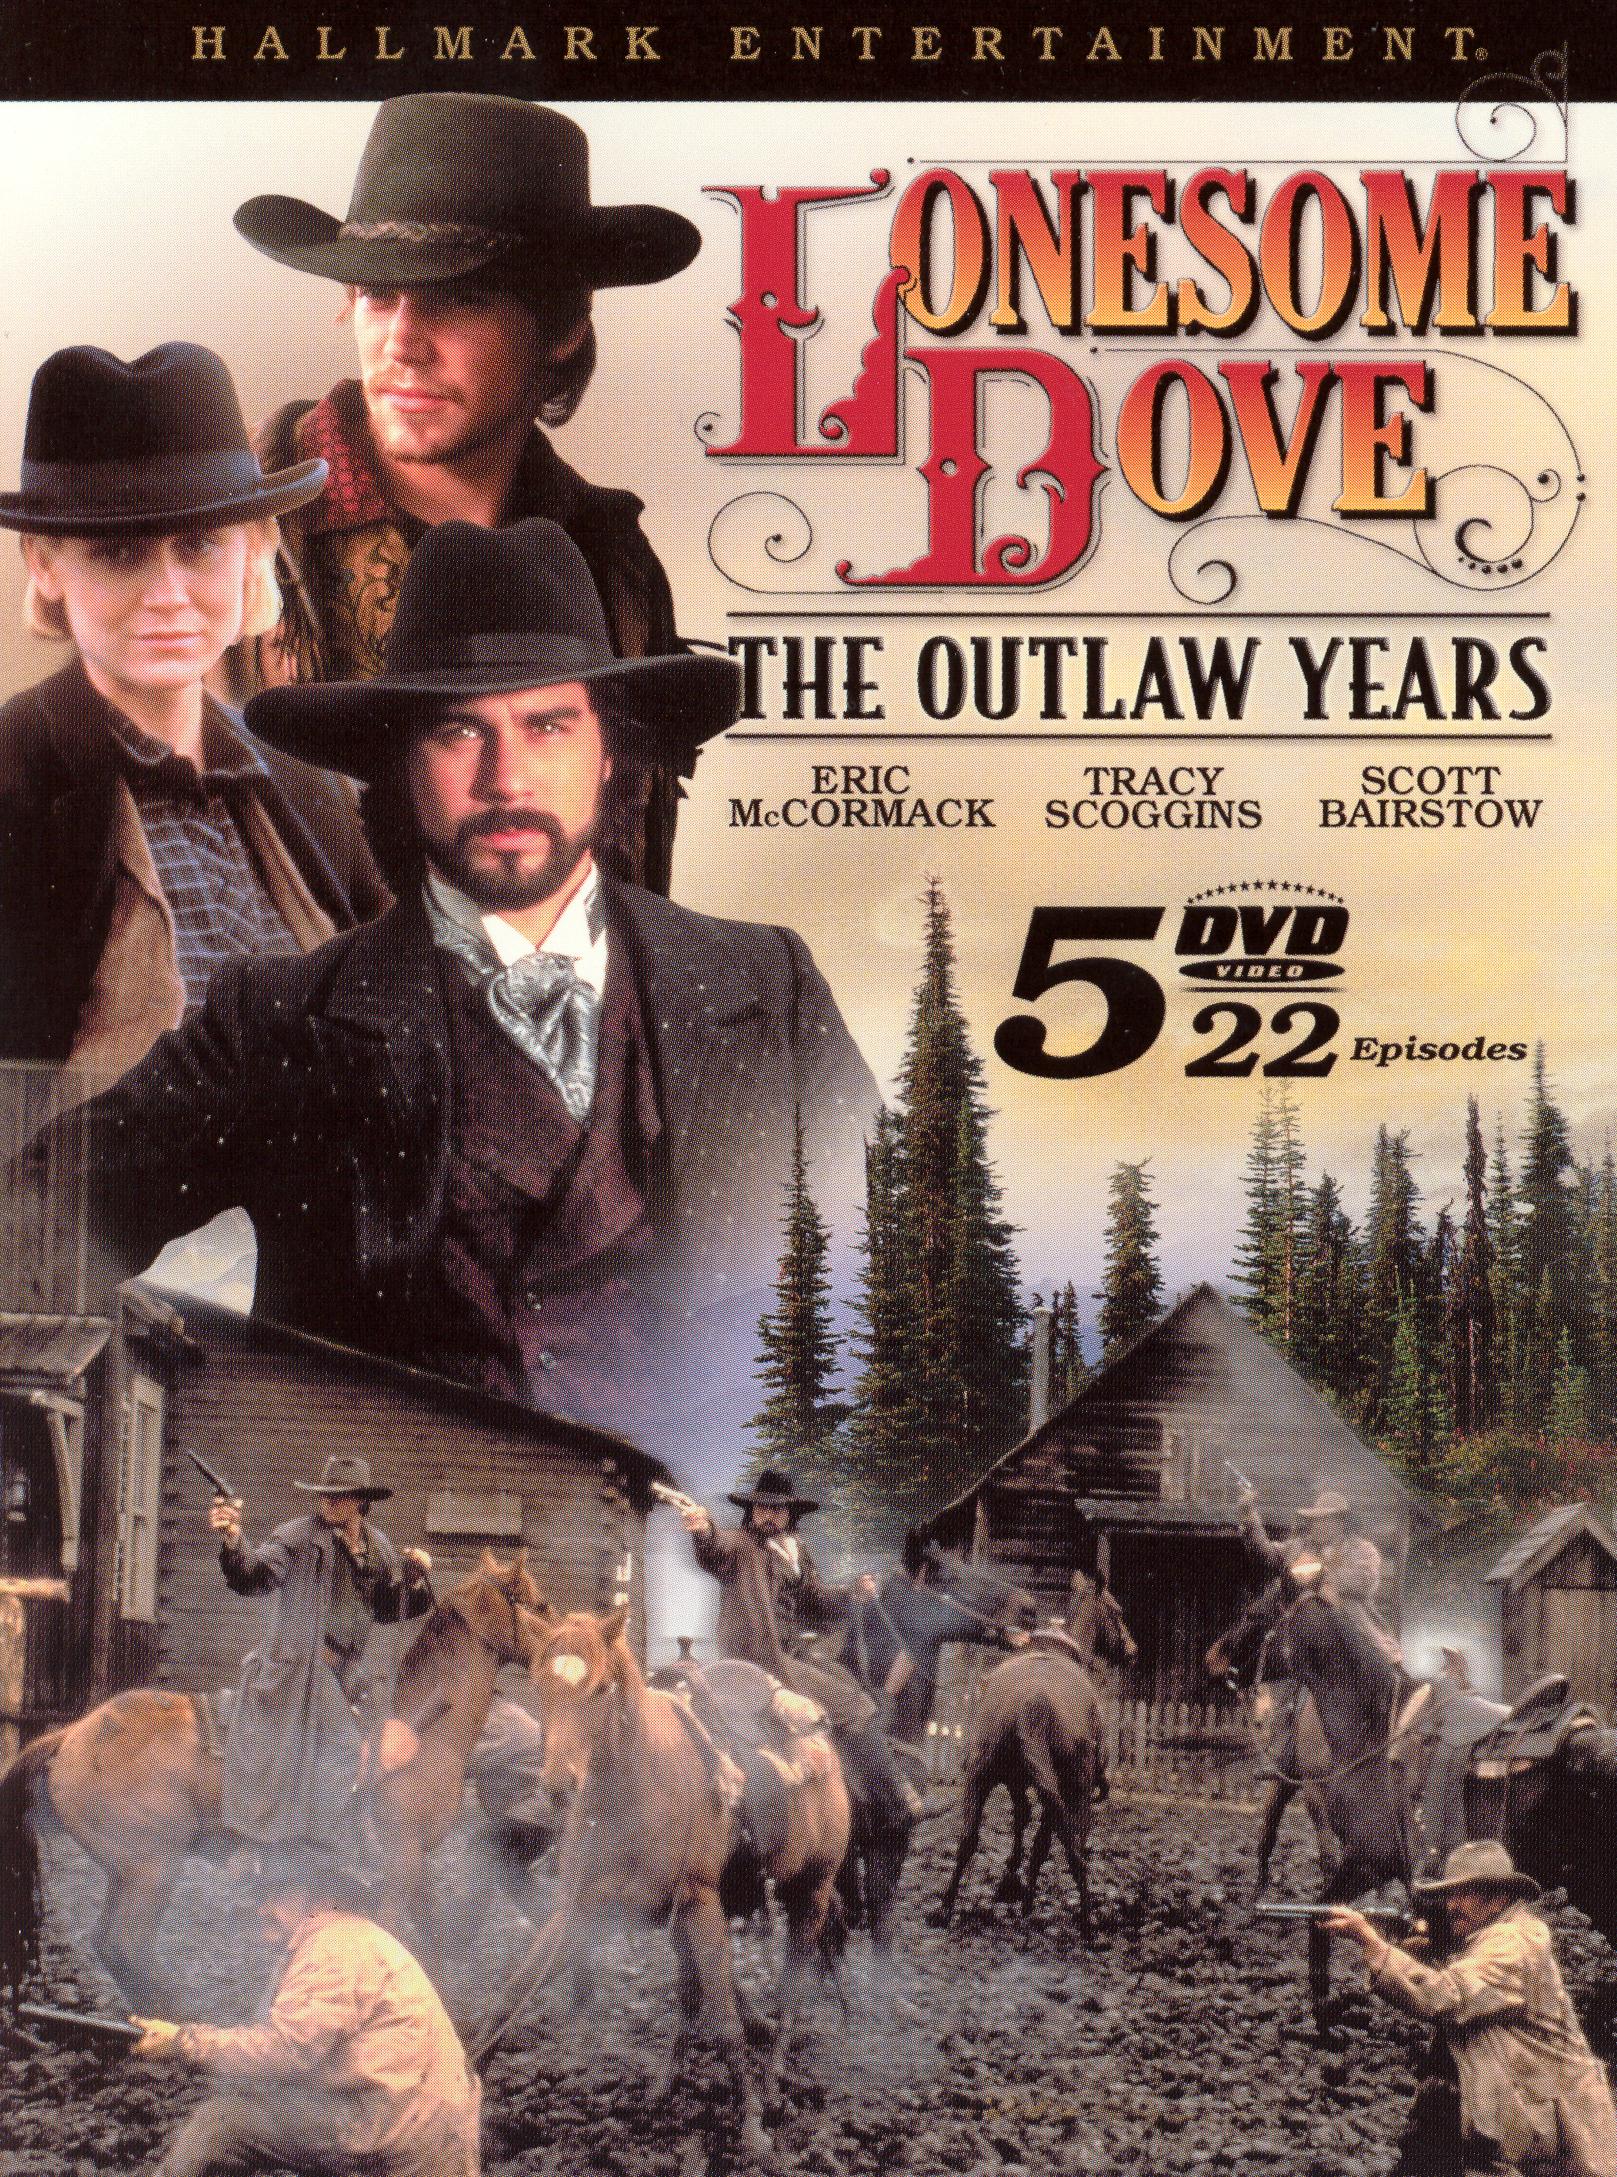 Lonesome dove the outlaw years